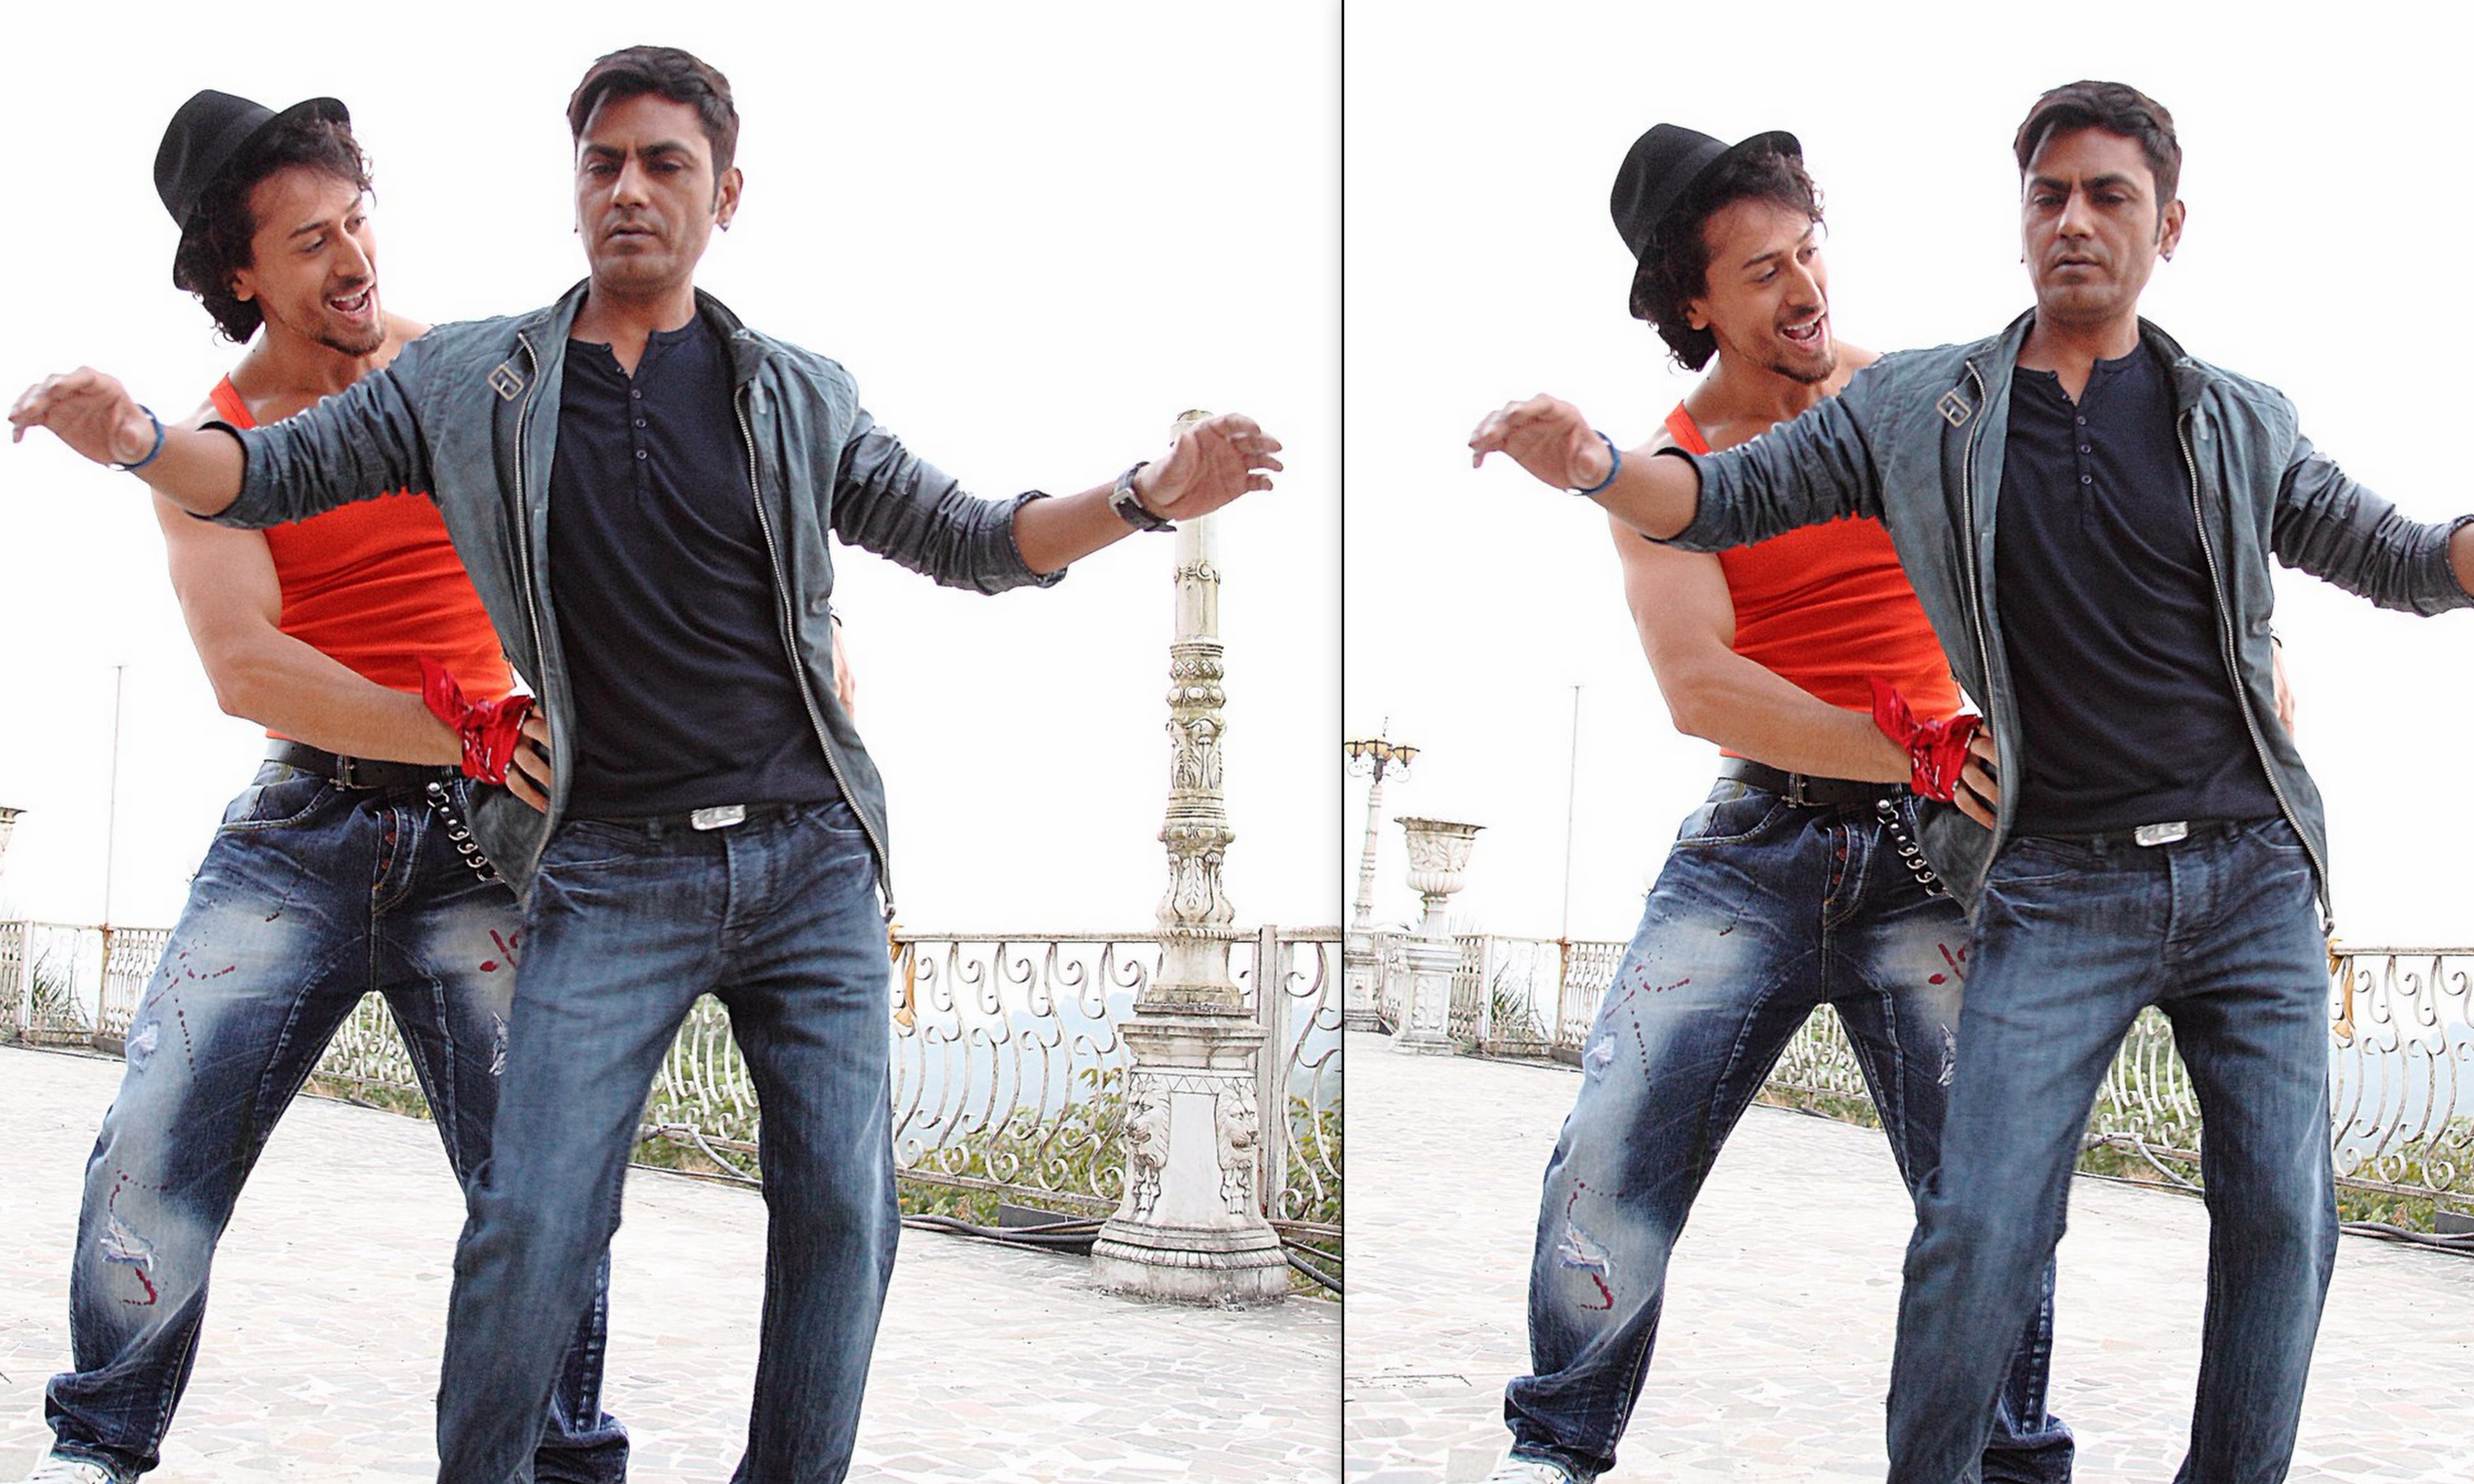 Nawazuddin Siddiqui hits the dance floor with ‘Munna Michael’ new song ‘Swag’!